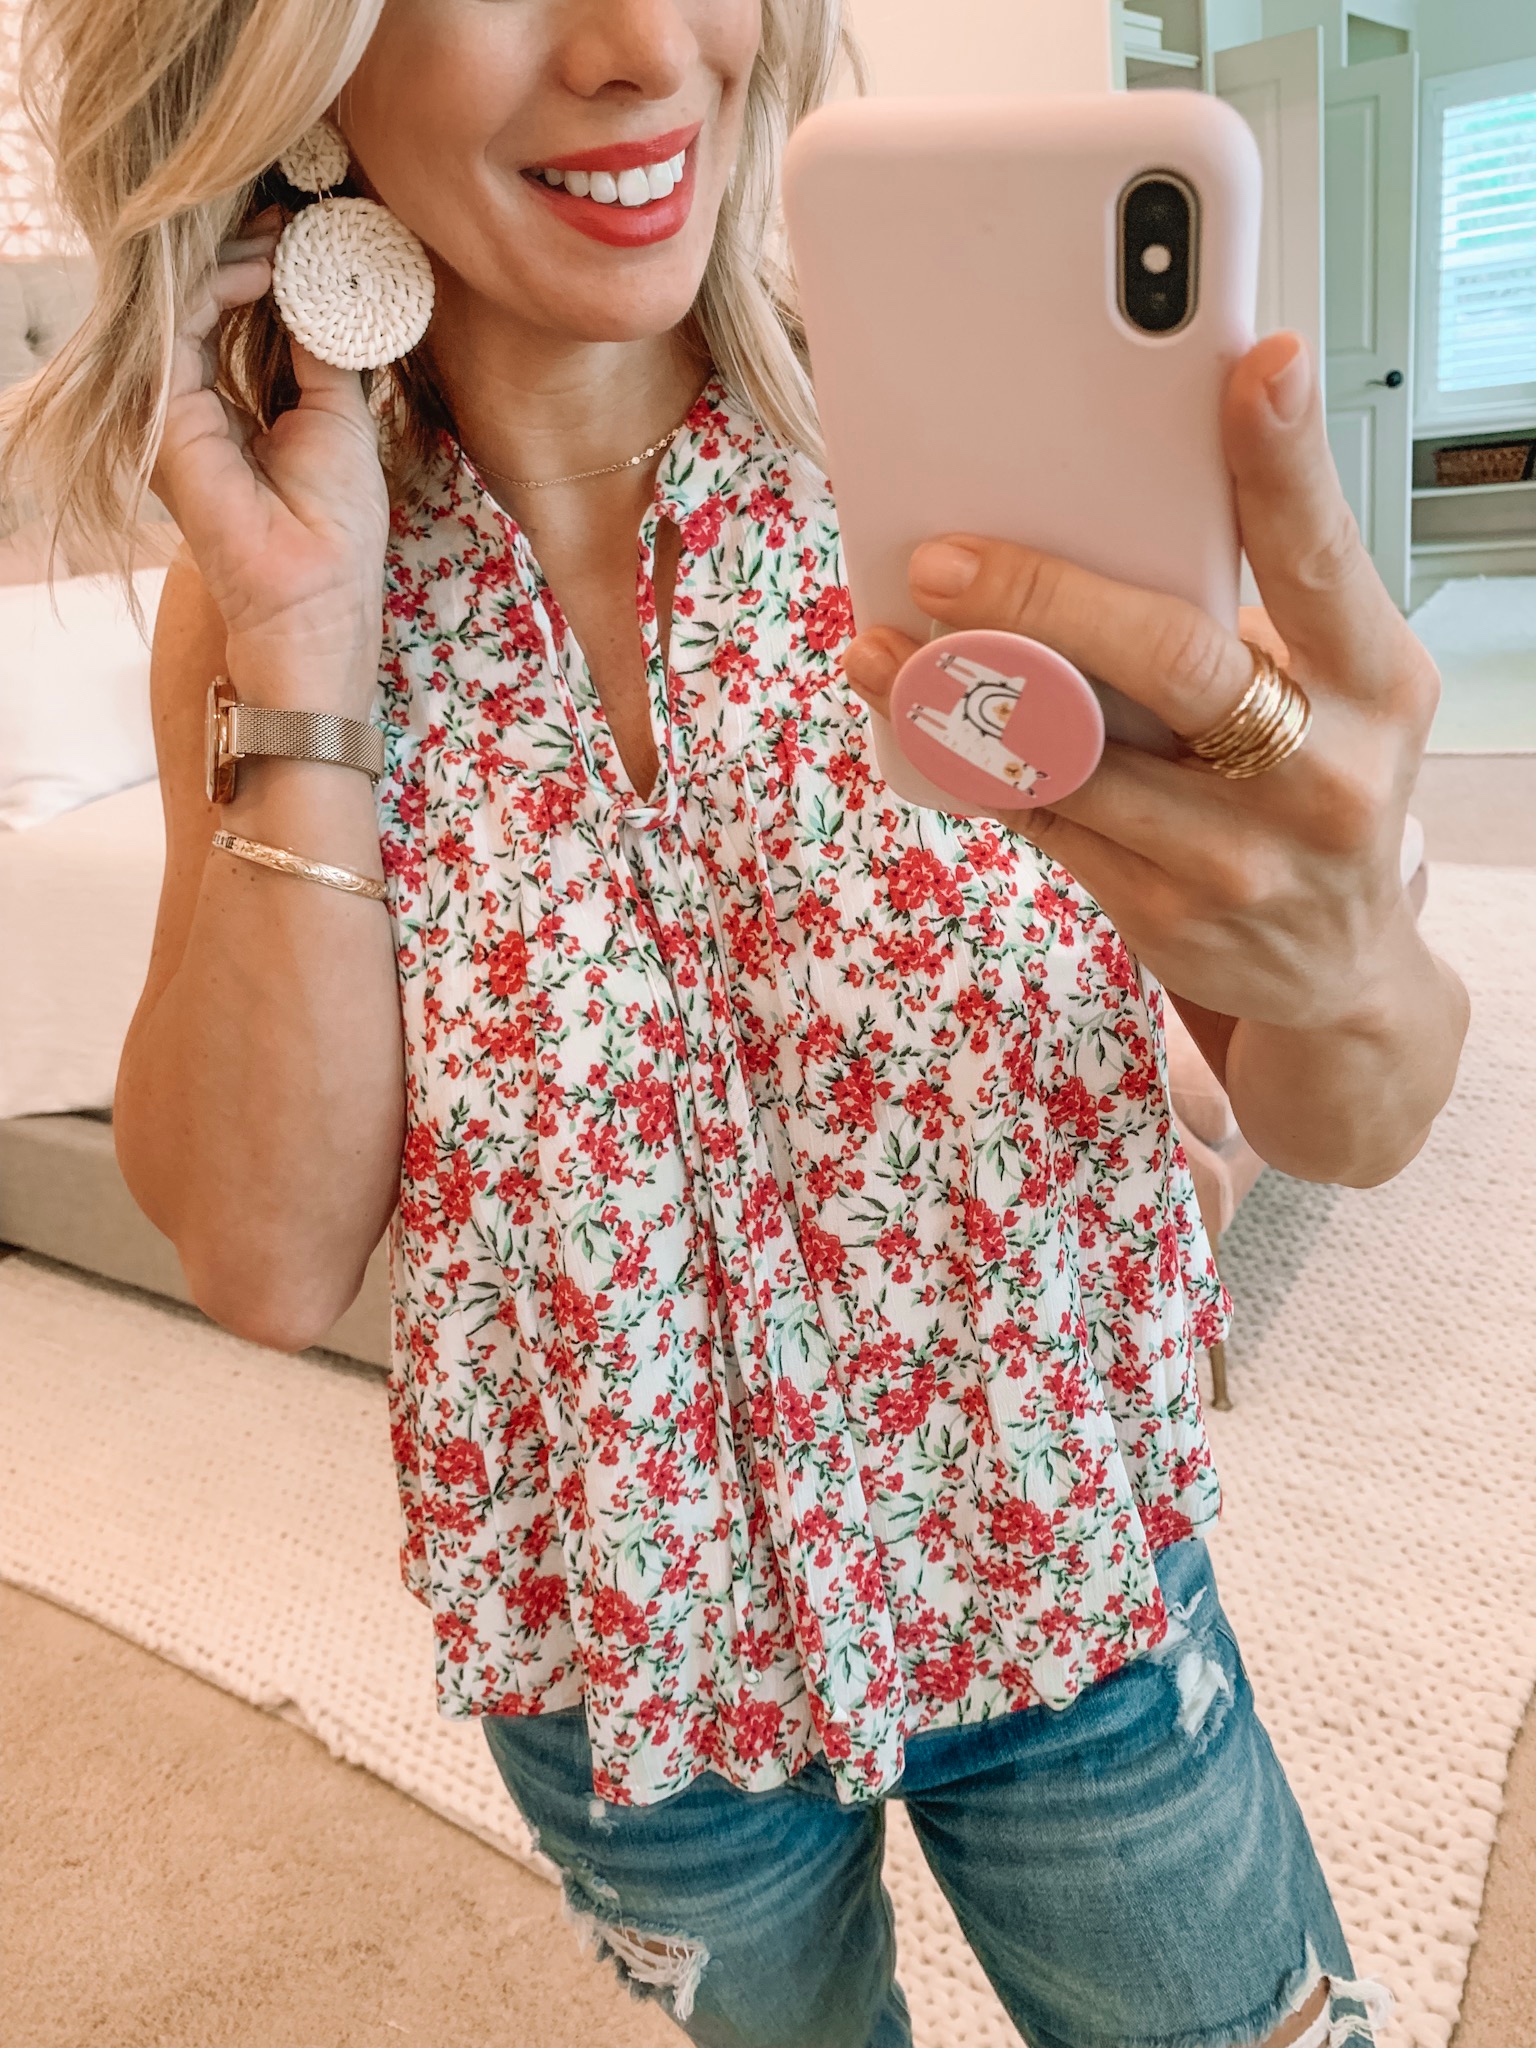 Floral top and ripped jeans with wedges